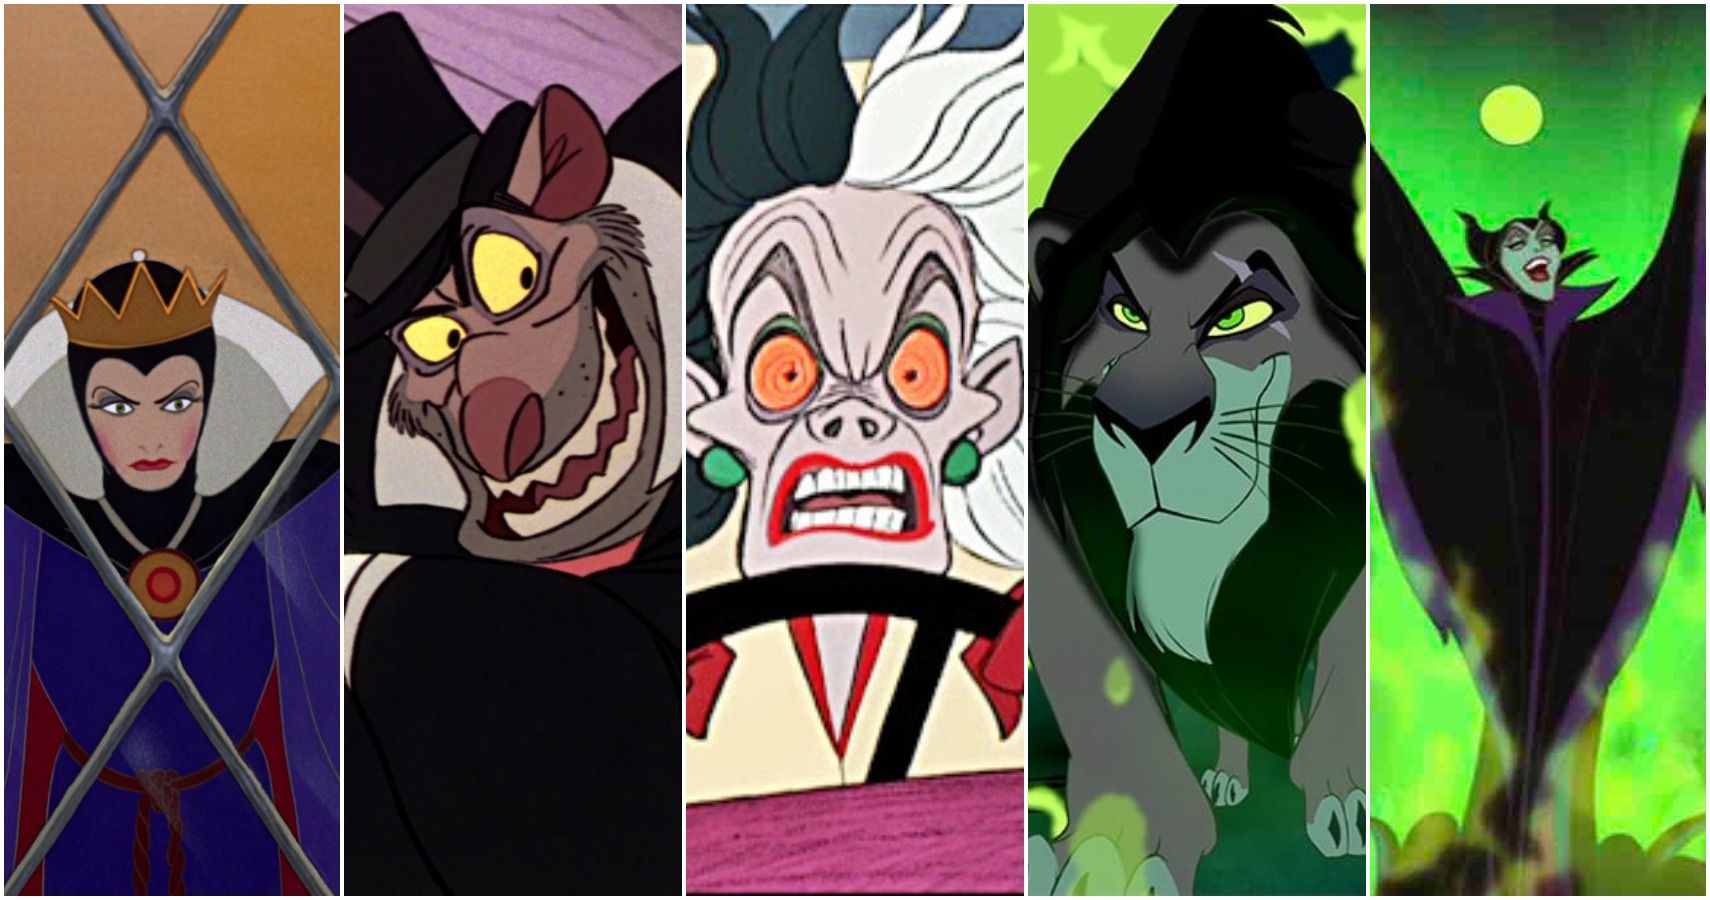 What to Watch 5 Most Unhinged Disney Animated Villains to Watch